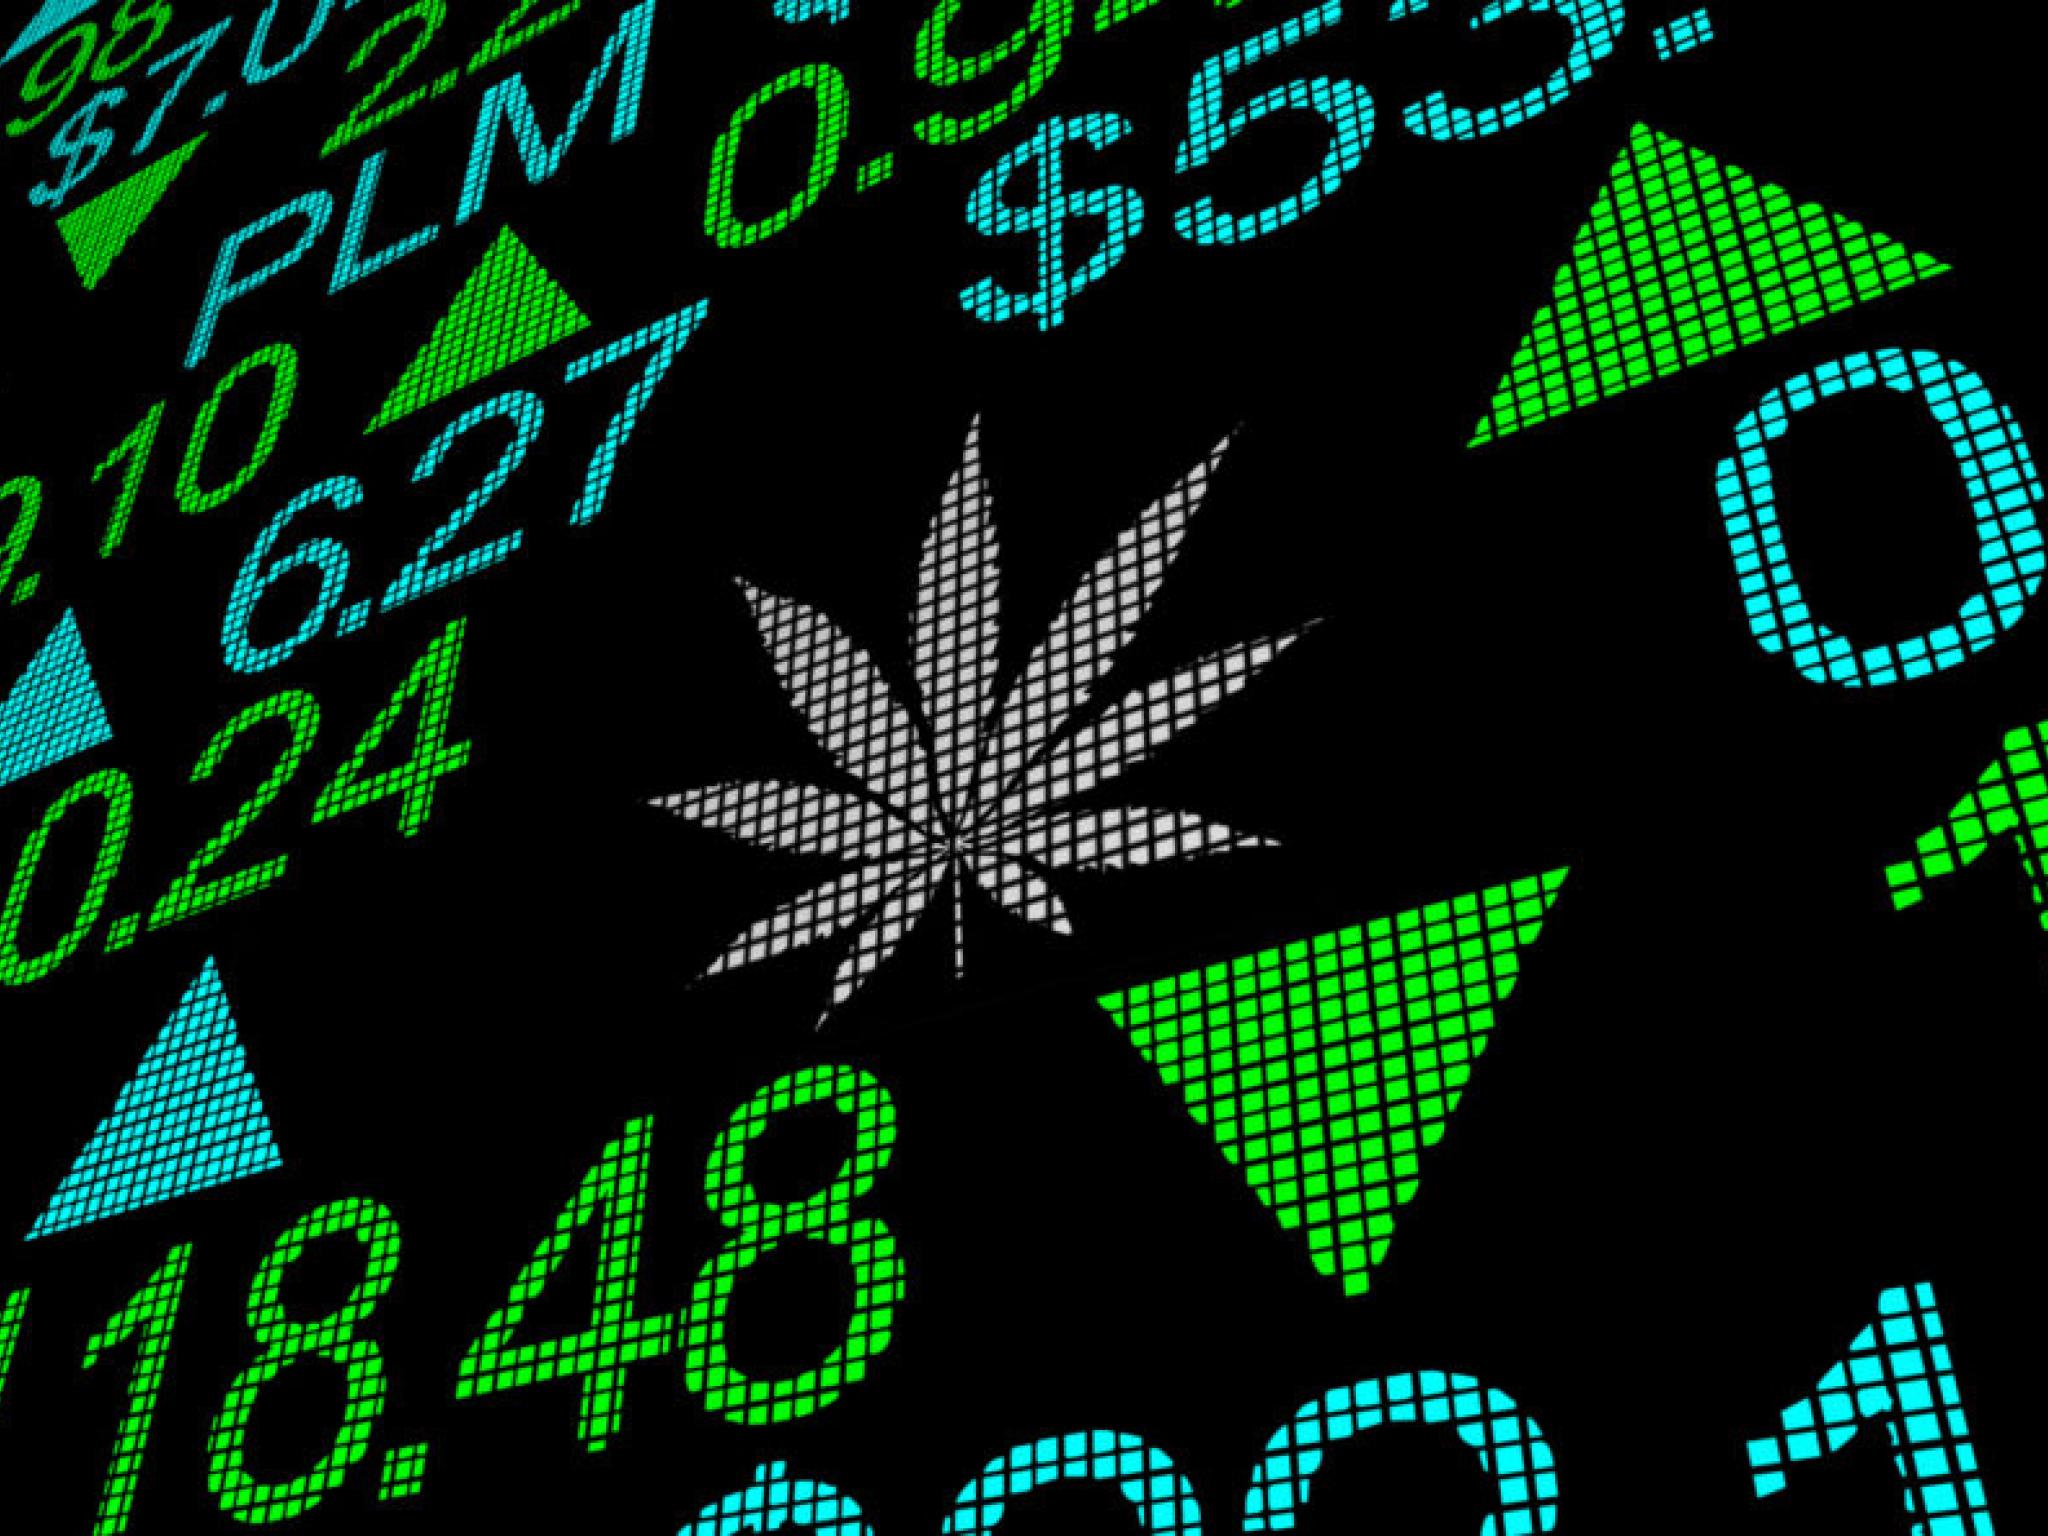  tilray-stock-is-trading-higher-tuesday-heres-why 